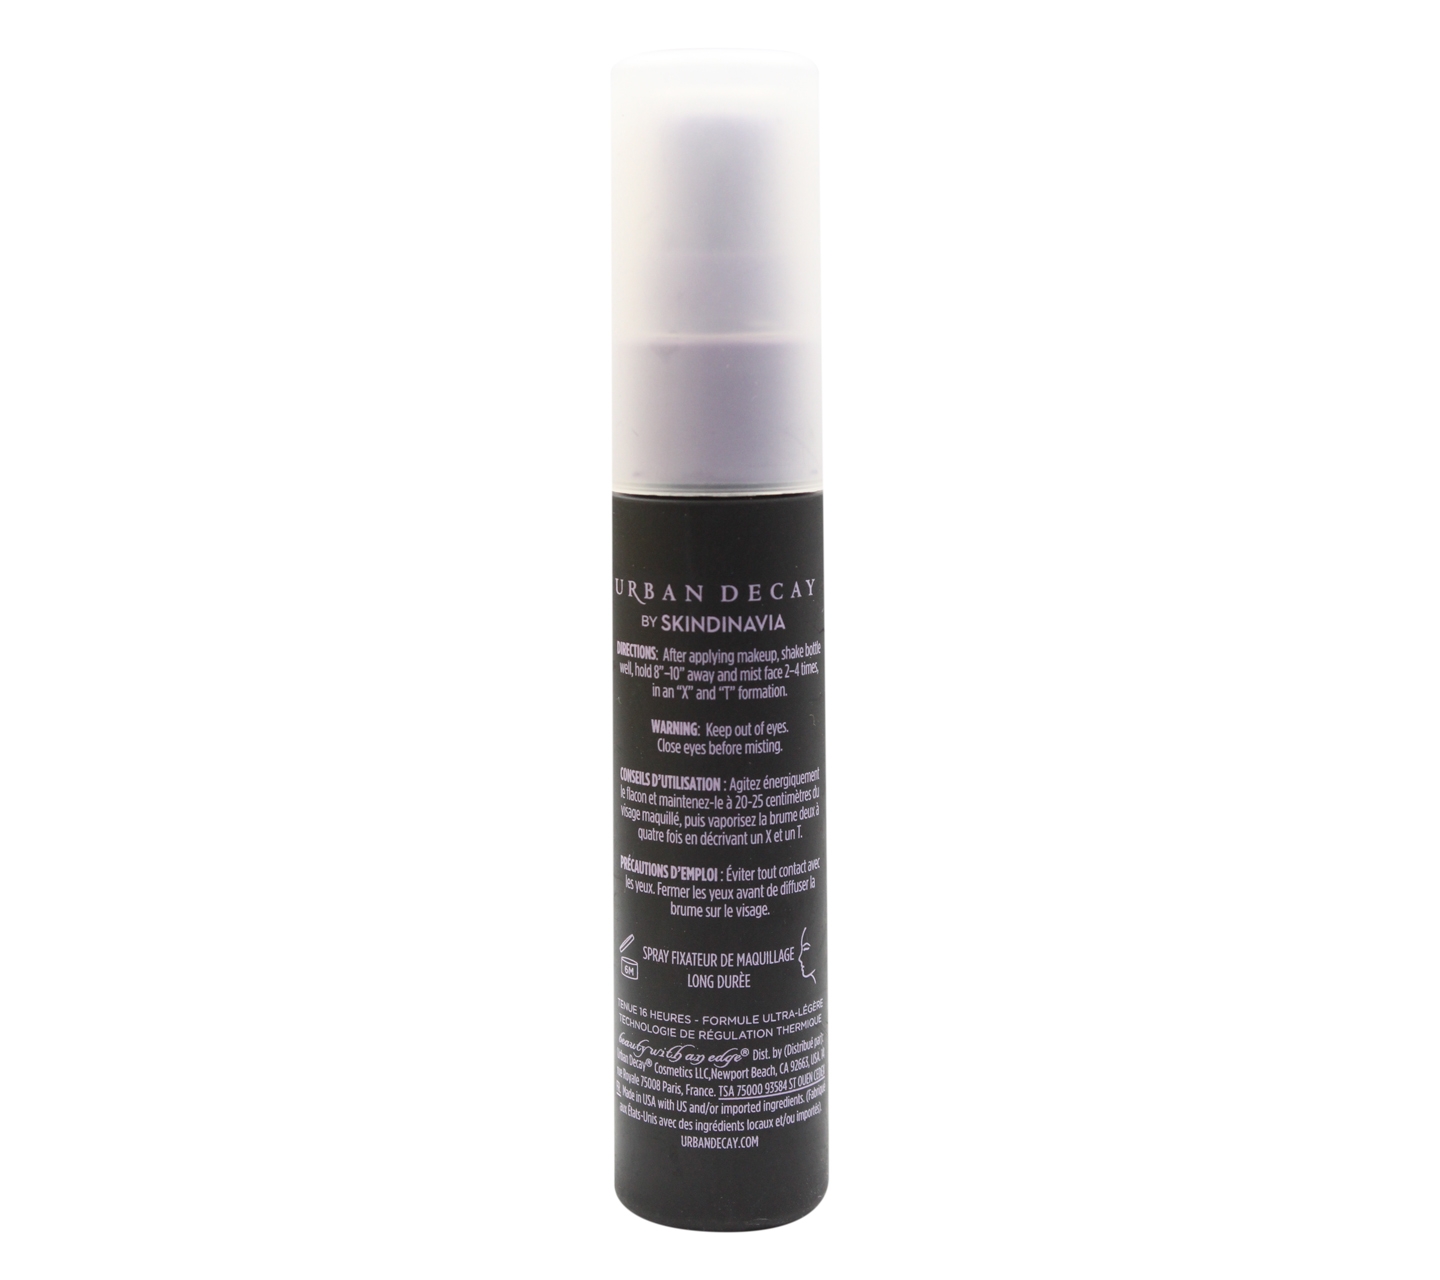 Urban Decay All Nighter Long Lasting Makeup Setting Spray Faces